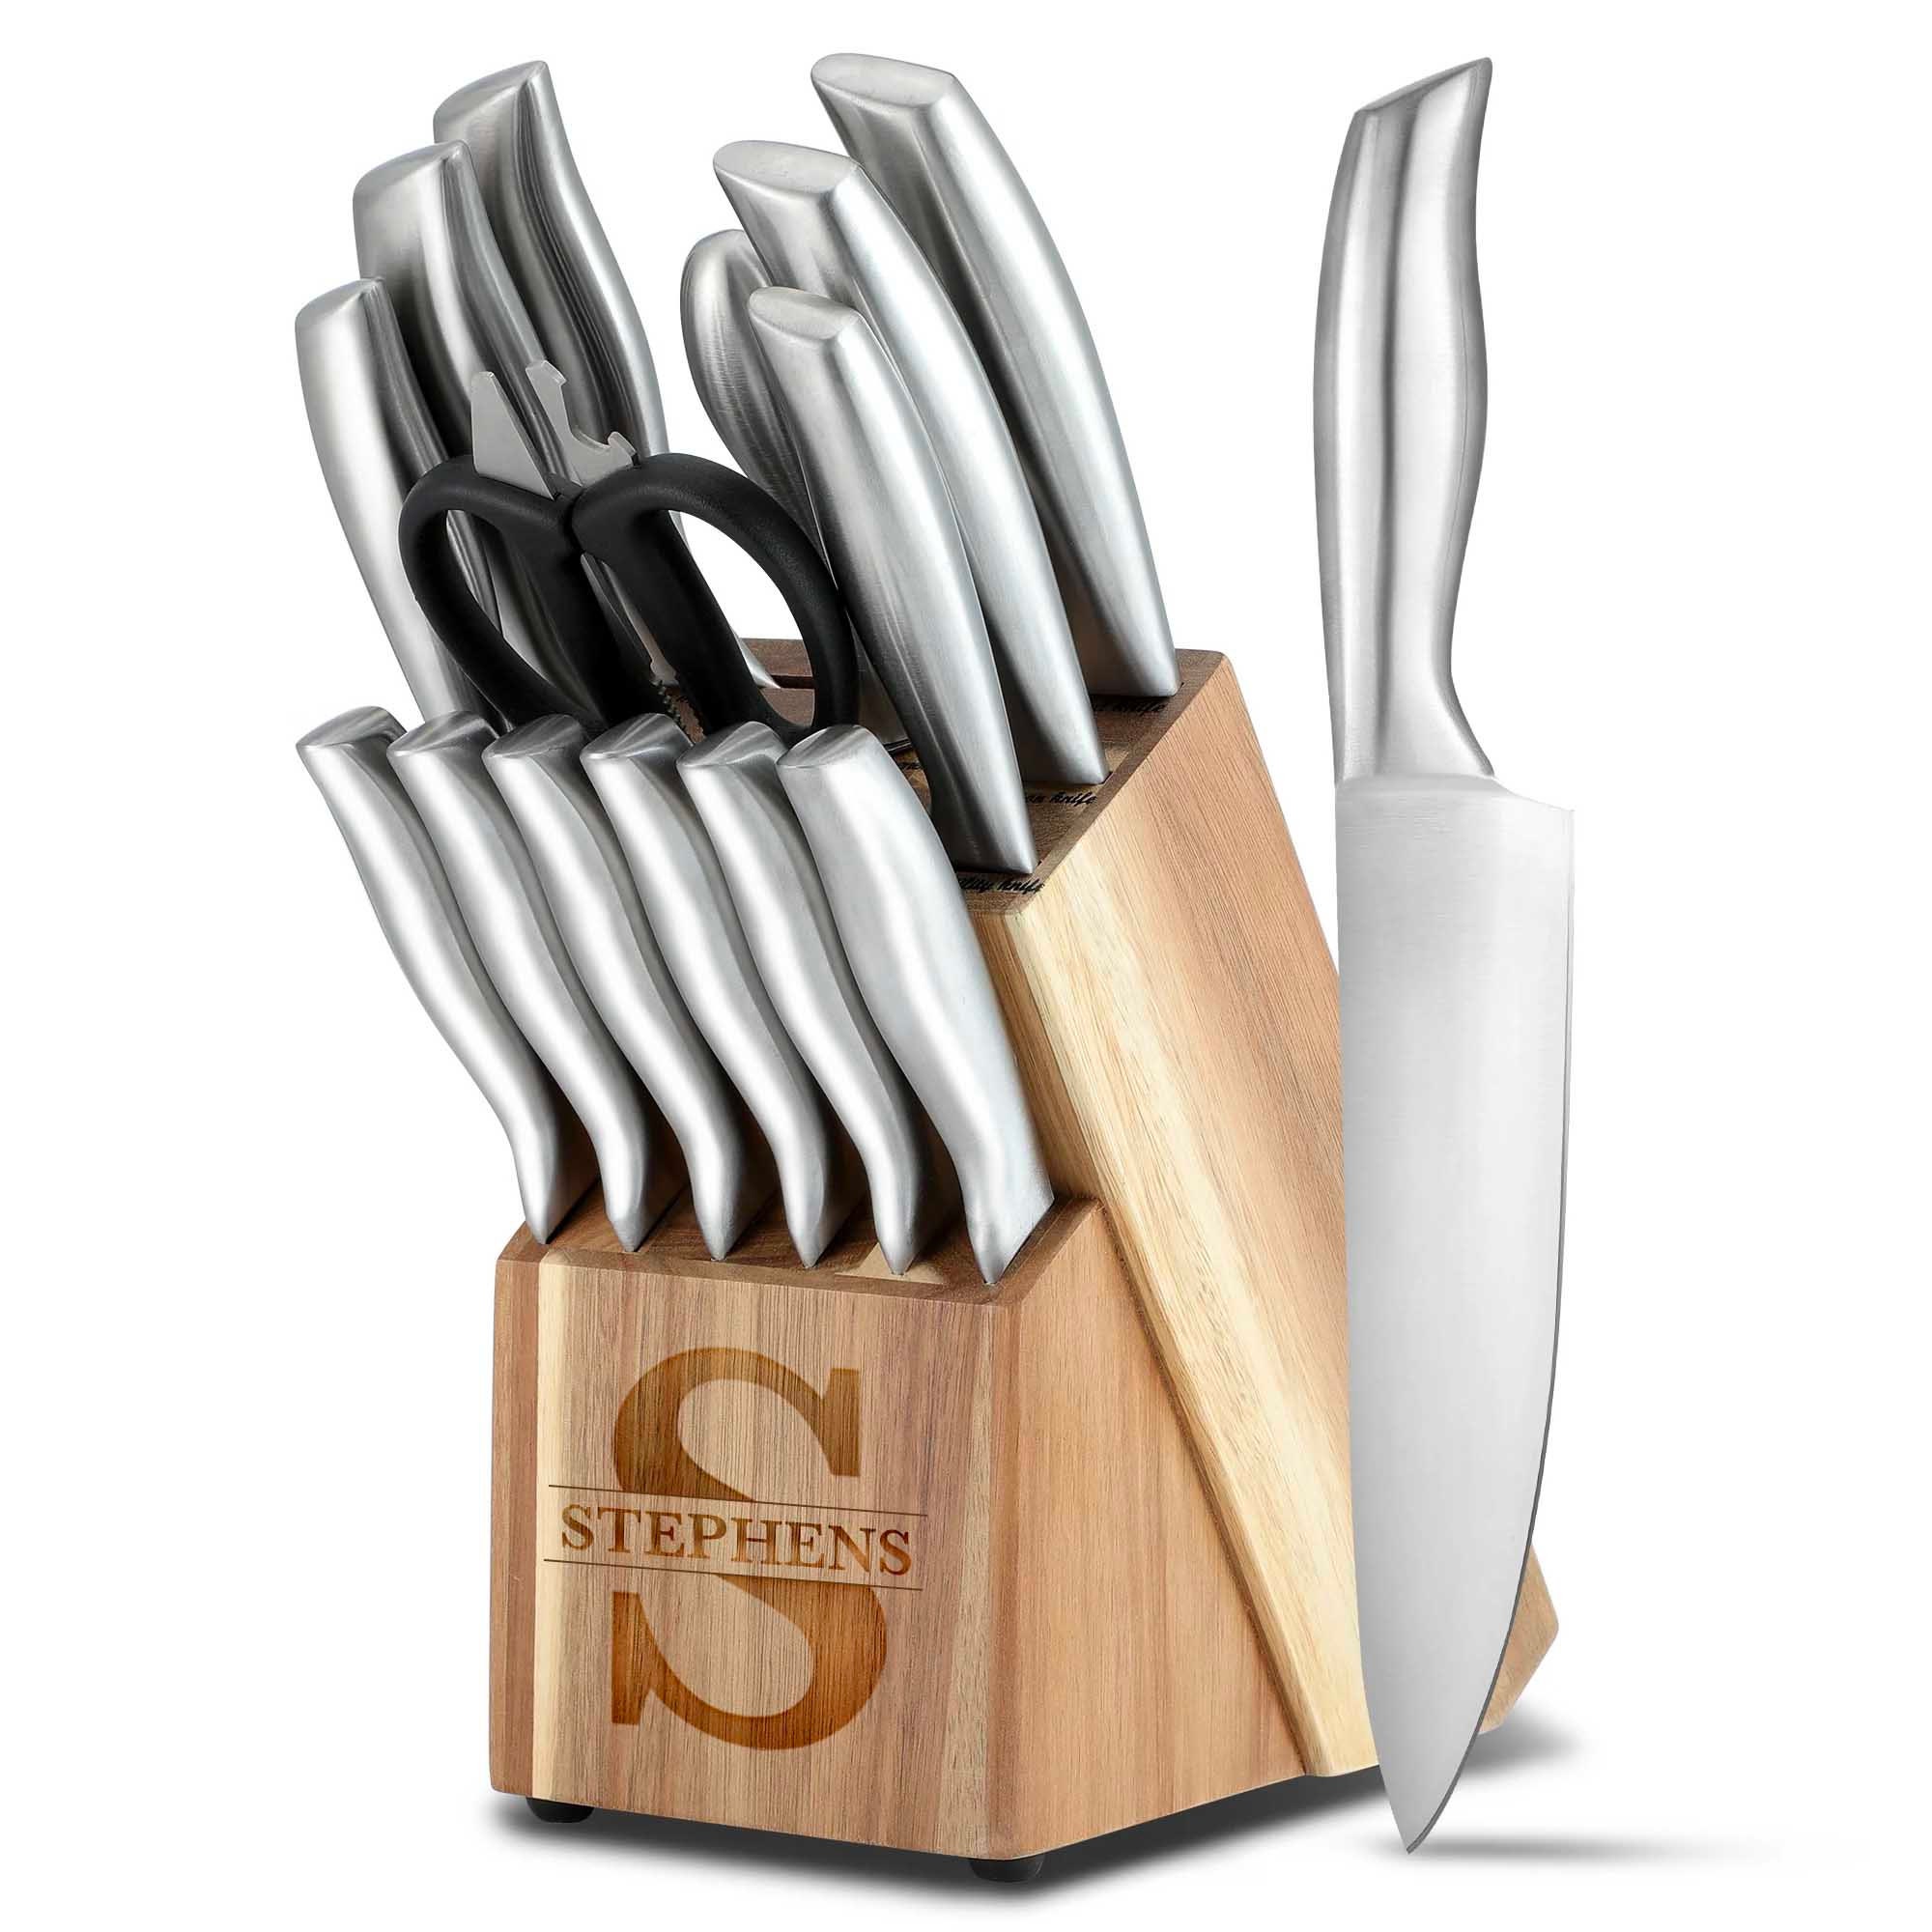 Cutlery Stainless Steel Knife Set, 13 Piece with Knife Block, Turquoise  Kitchen Knife With Storage Holder - AliExpress